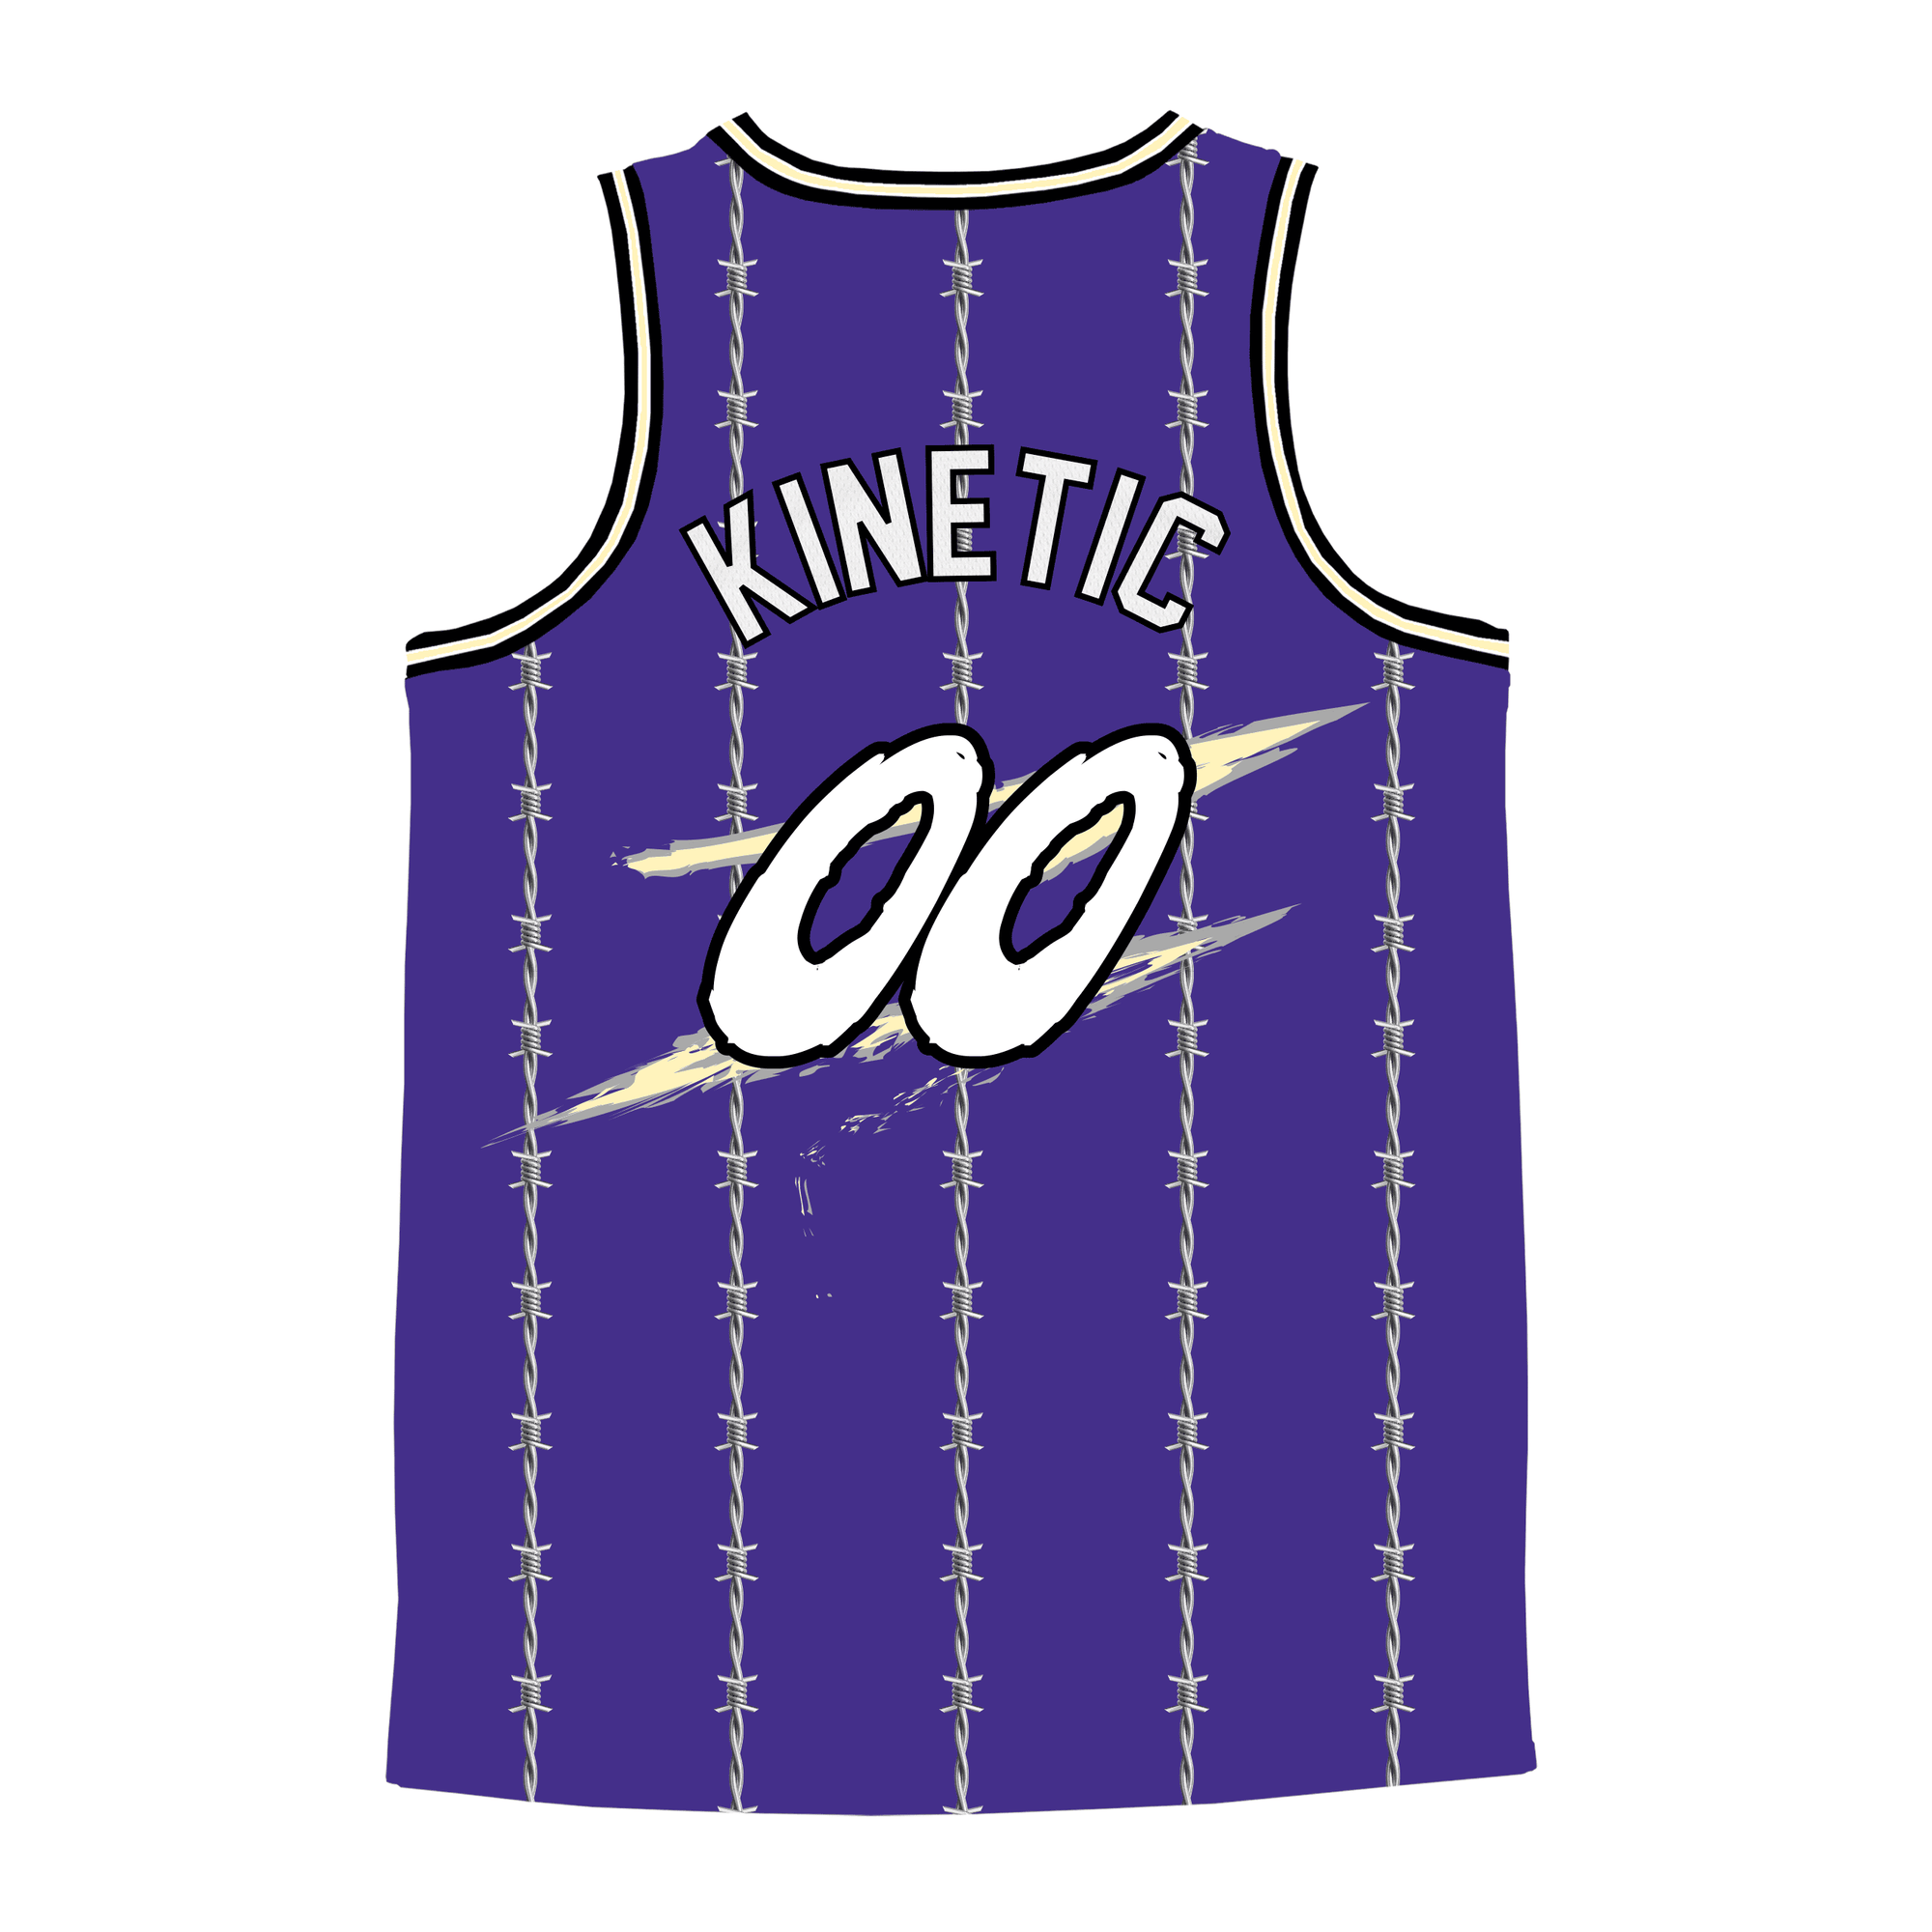 Pi Kappa Phi - Barbed Wire Basketball Jersey